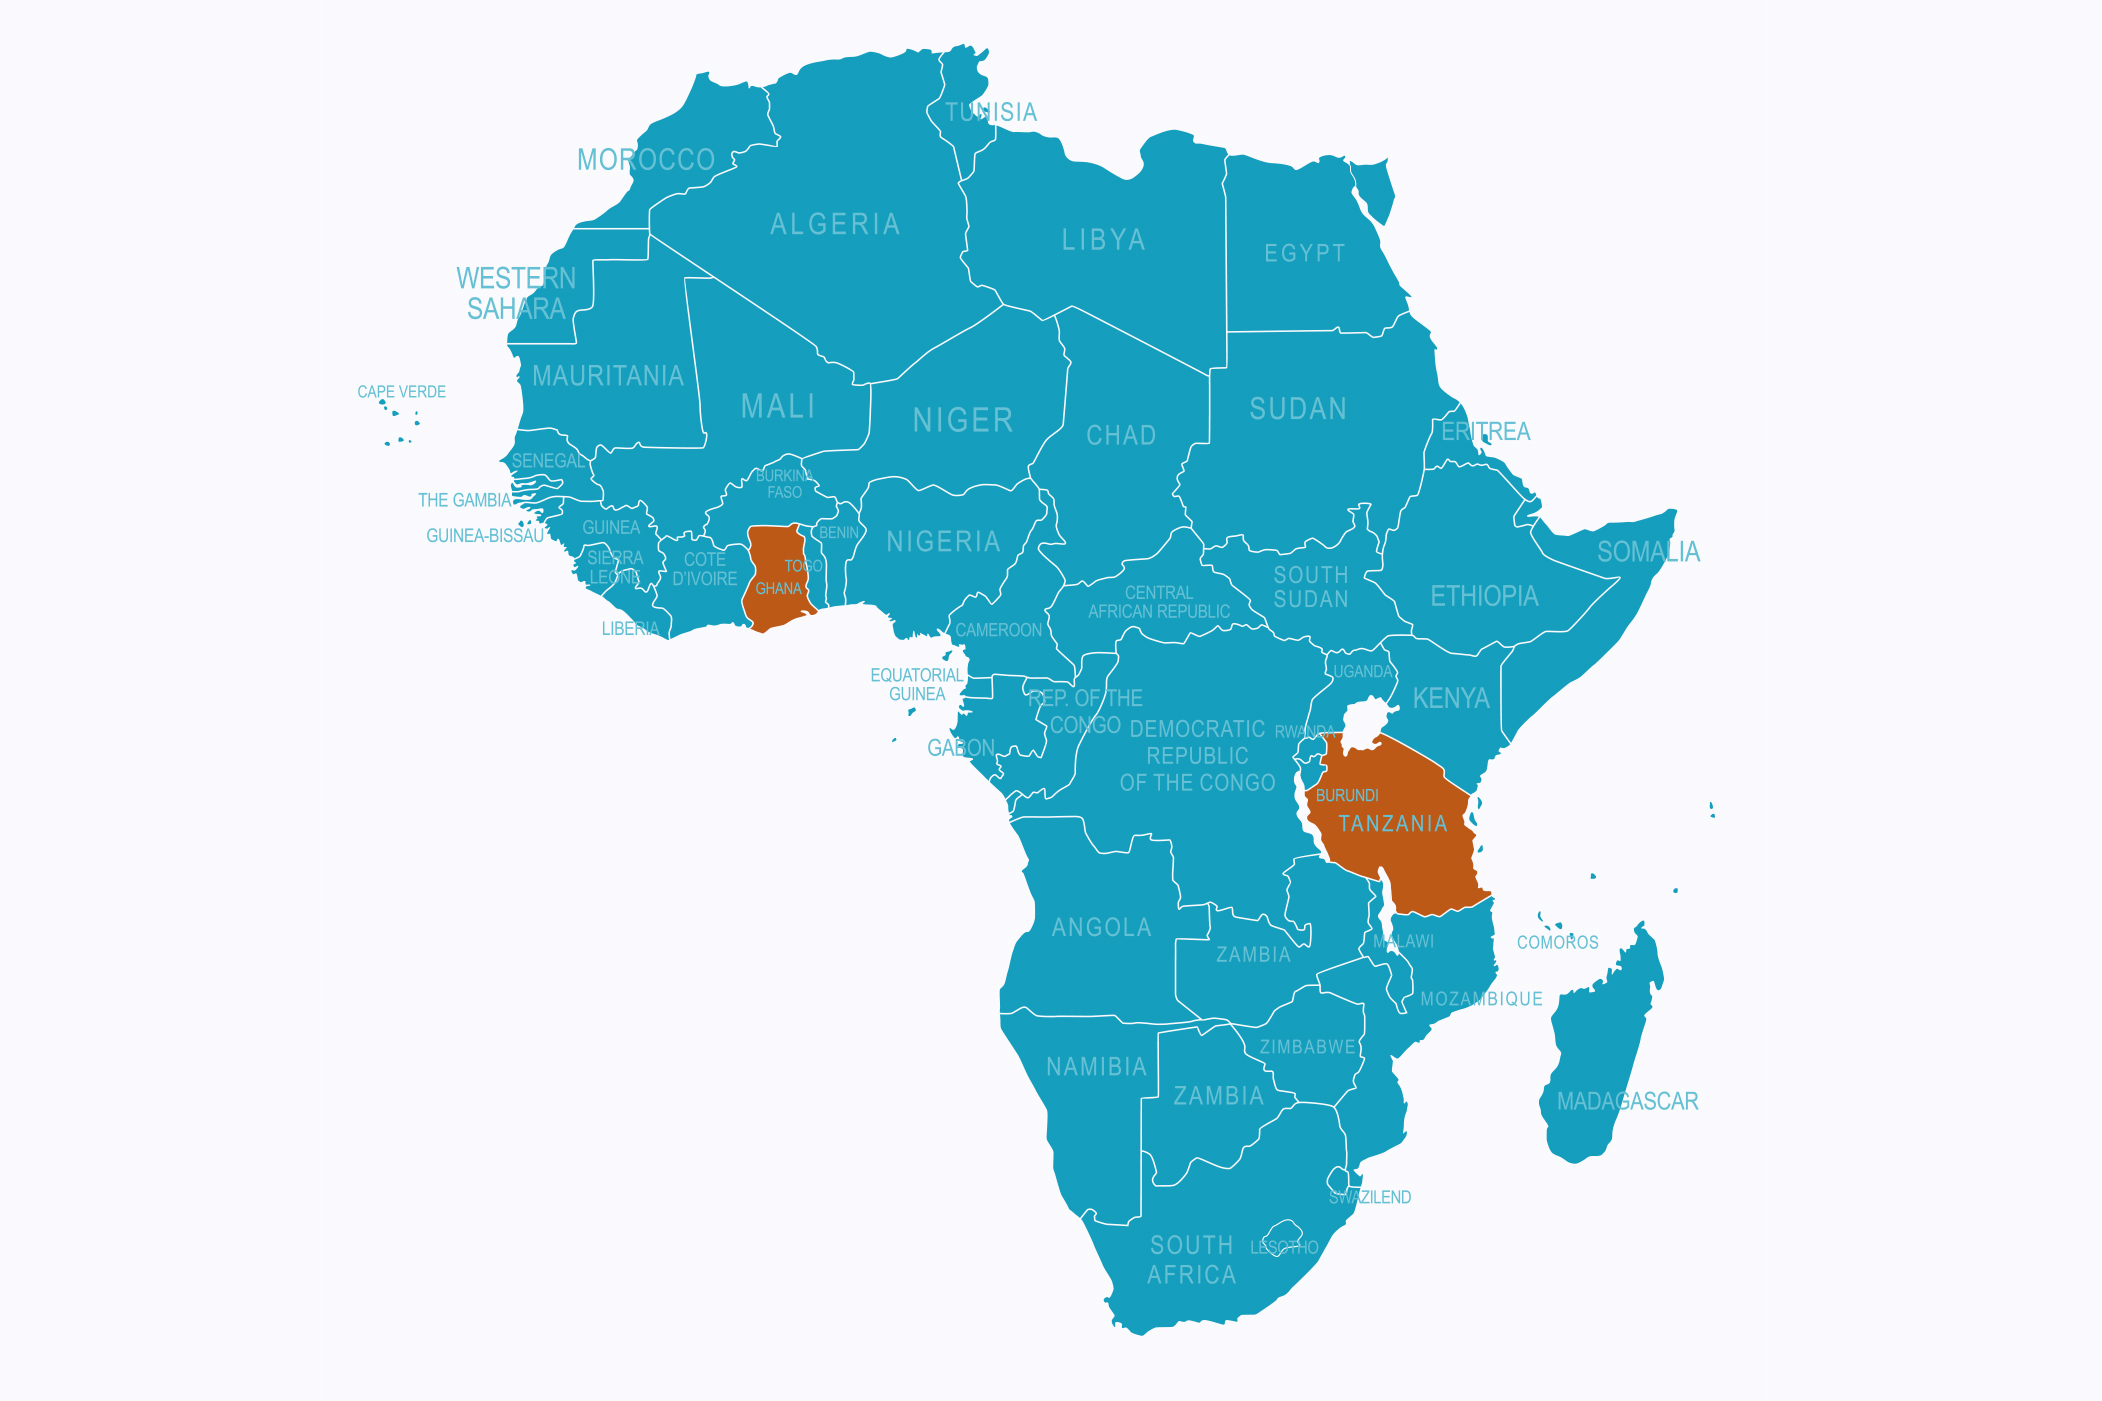 Map of Africa with Ghana and Tanzania highlighted